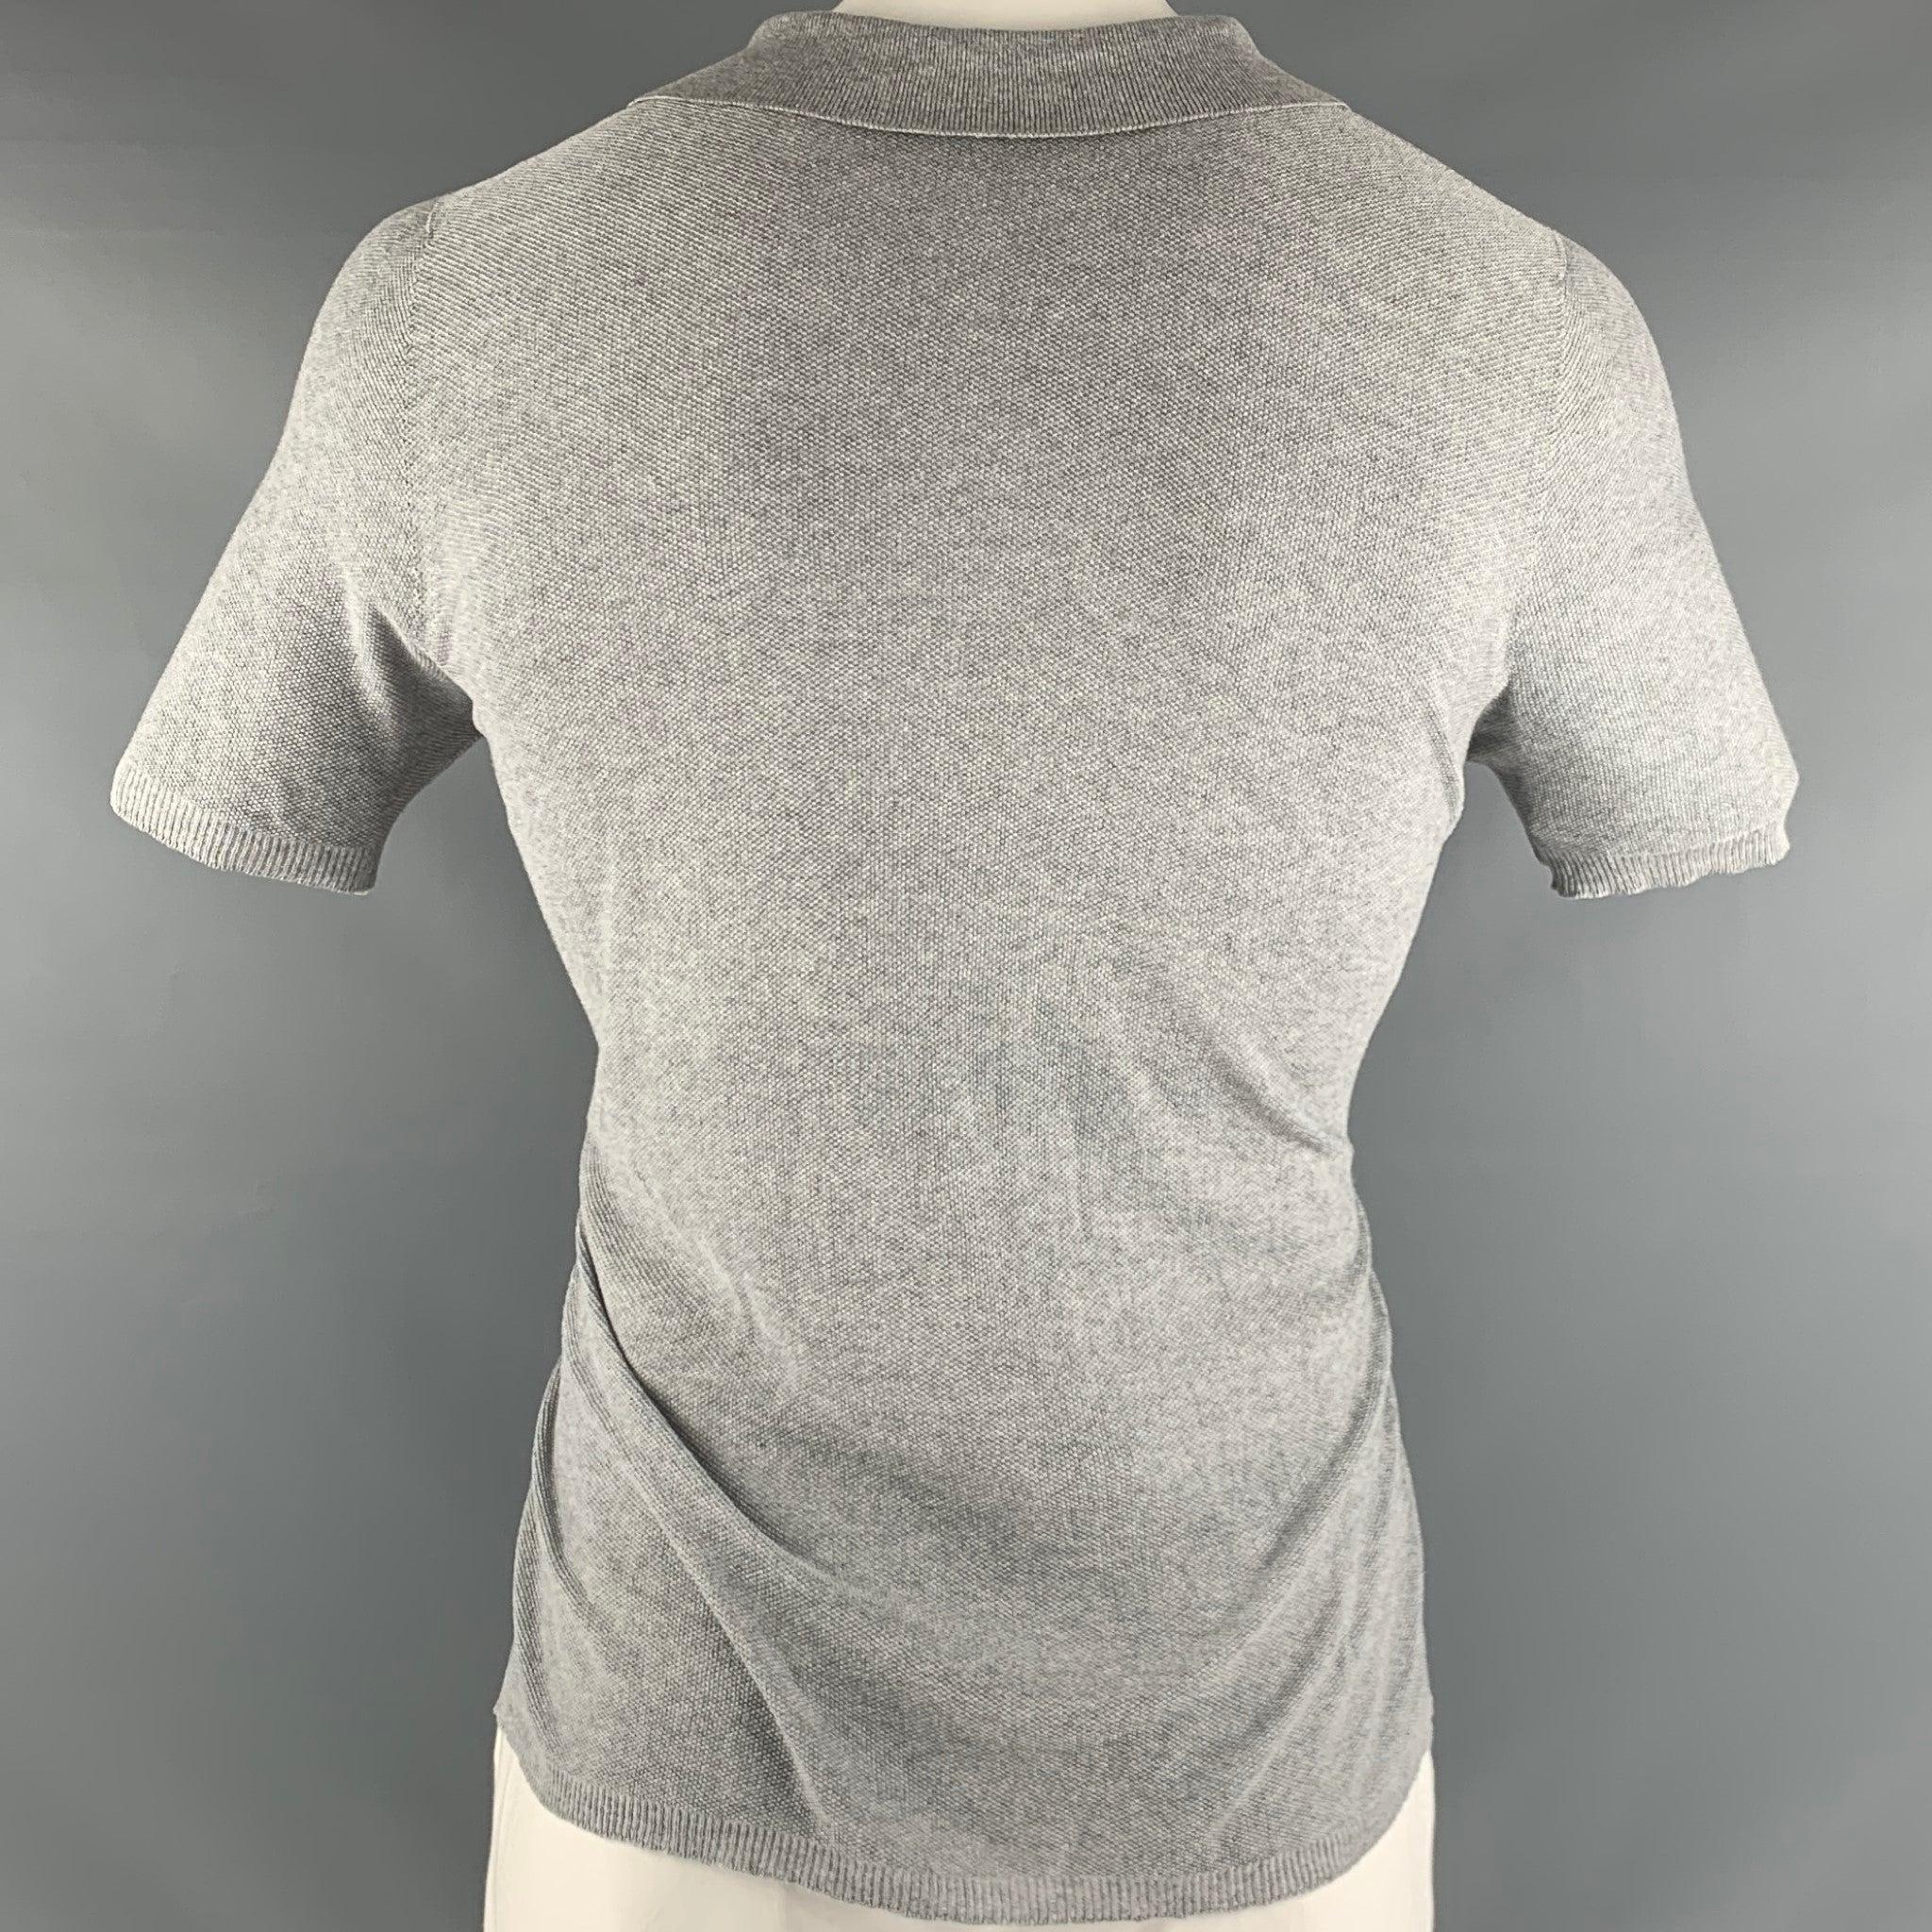 GIORGIO ARMANI Size 12 Grey Silk V-Neck Short Sleeve Shirt In Excellent Condition For Sale In San Francisco, CA